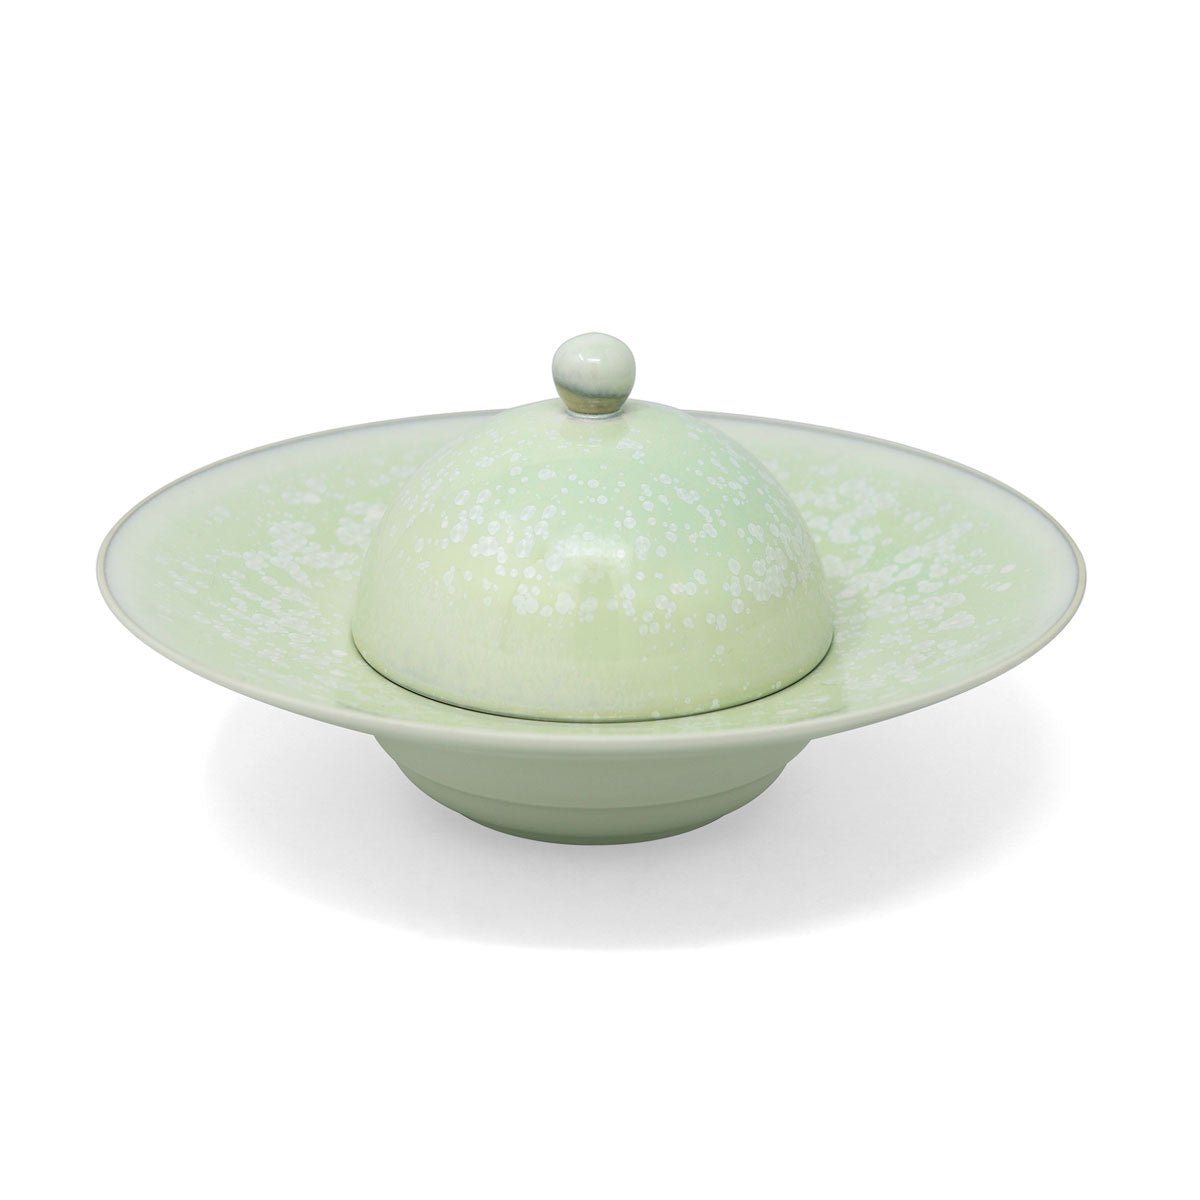 SONG Almond - Bell, Soup plate with wing